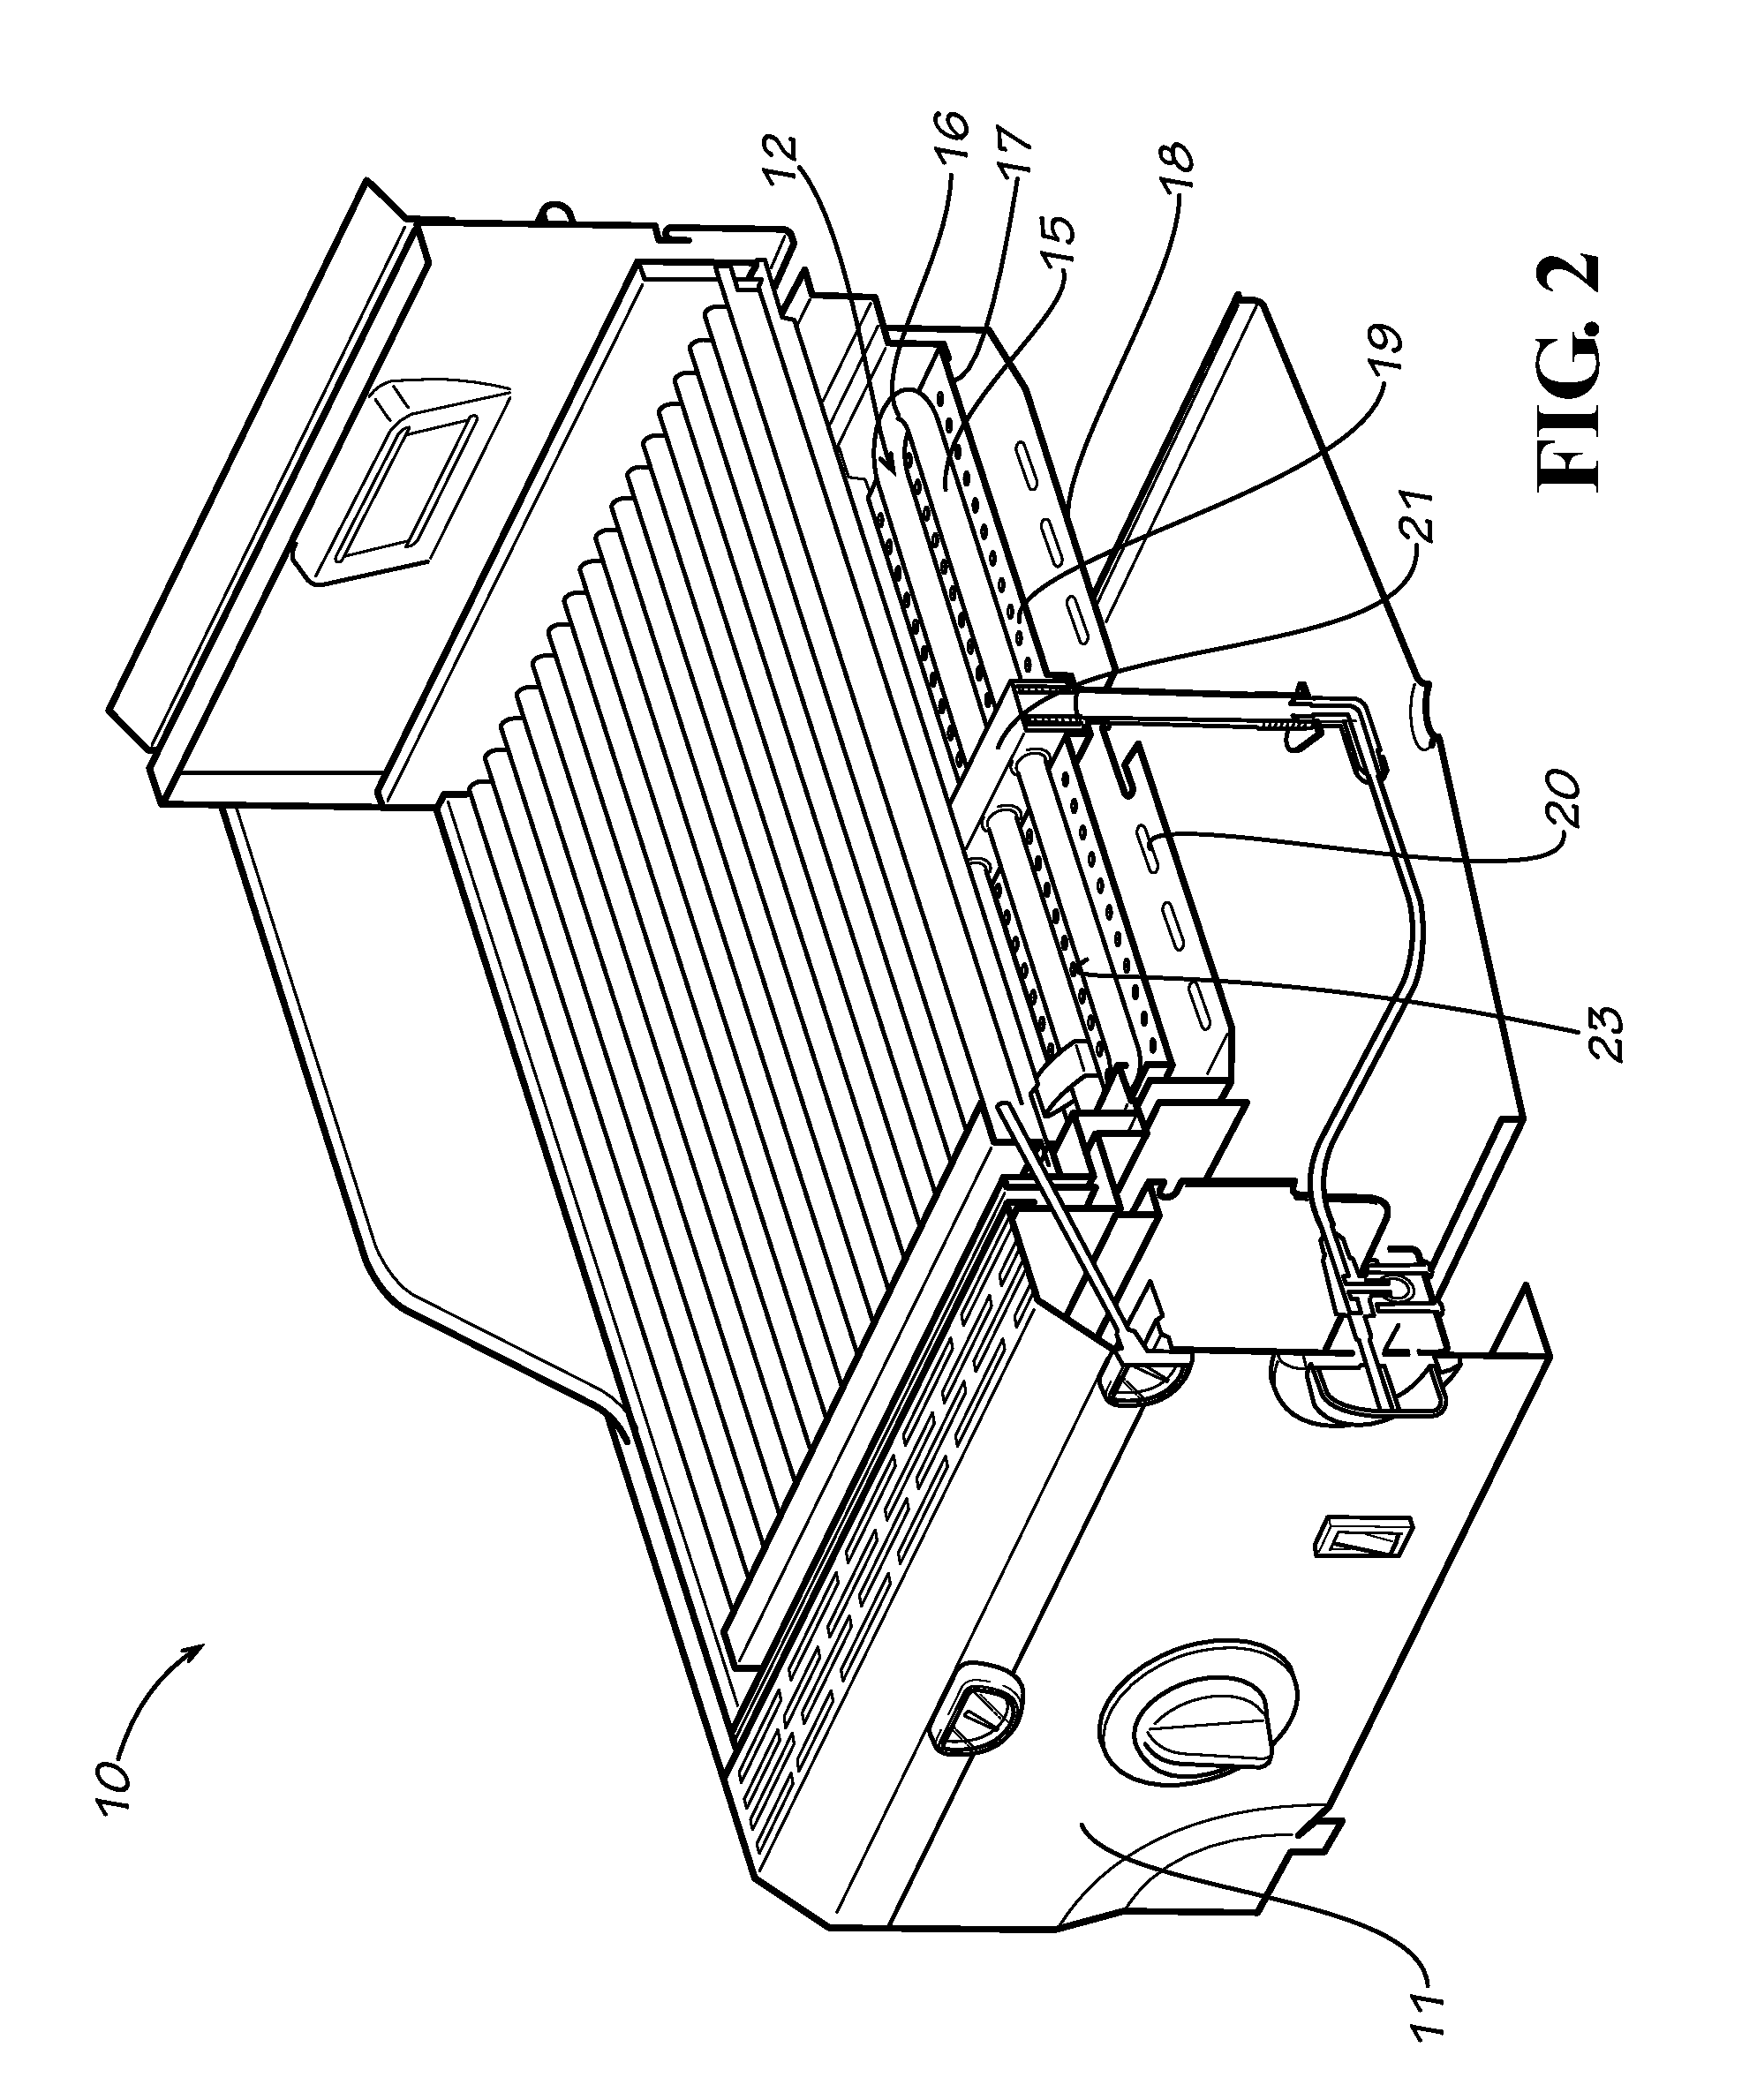 Parallel tube burner with improved cooling and reduced size